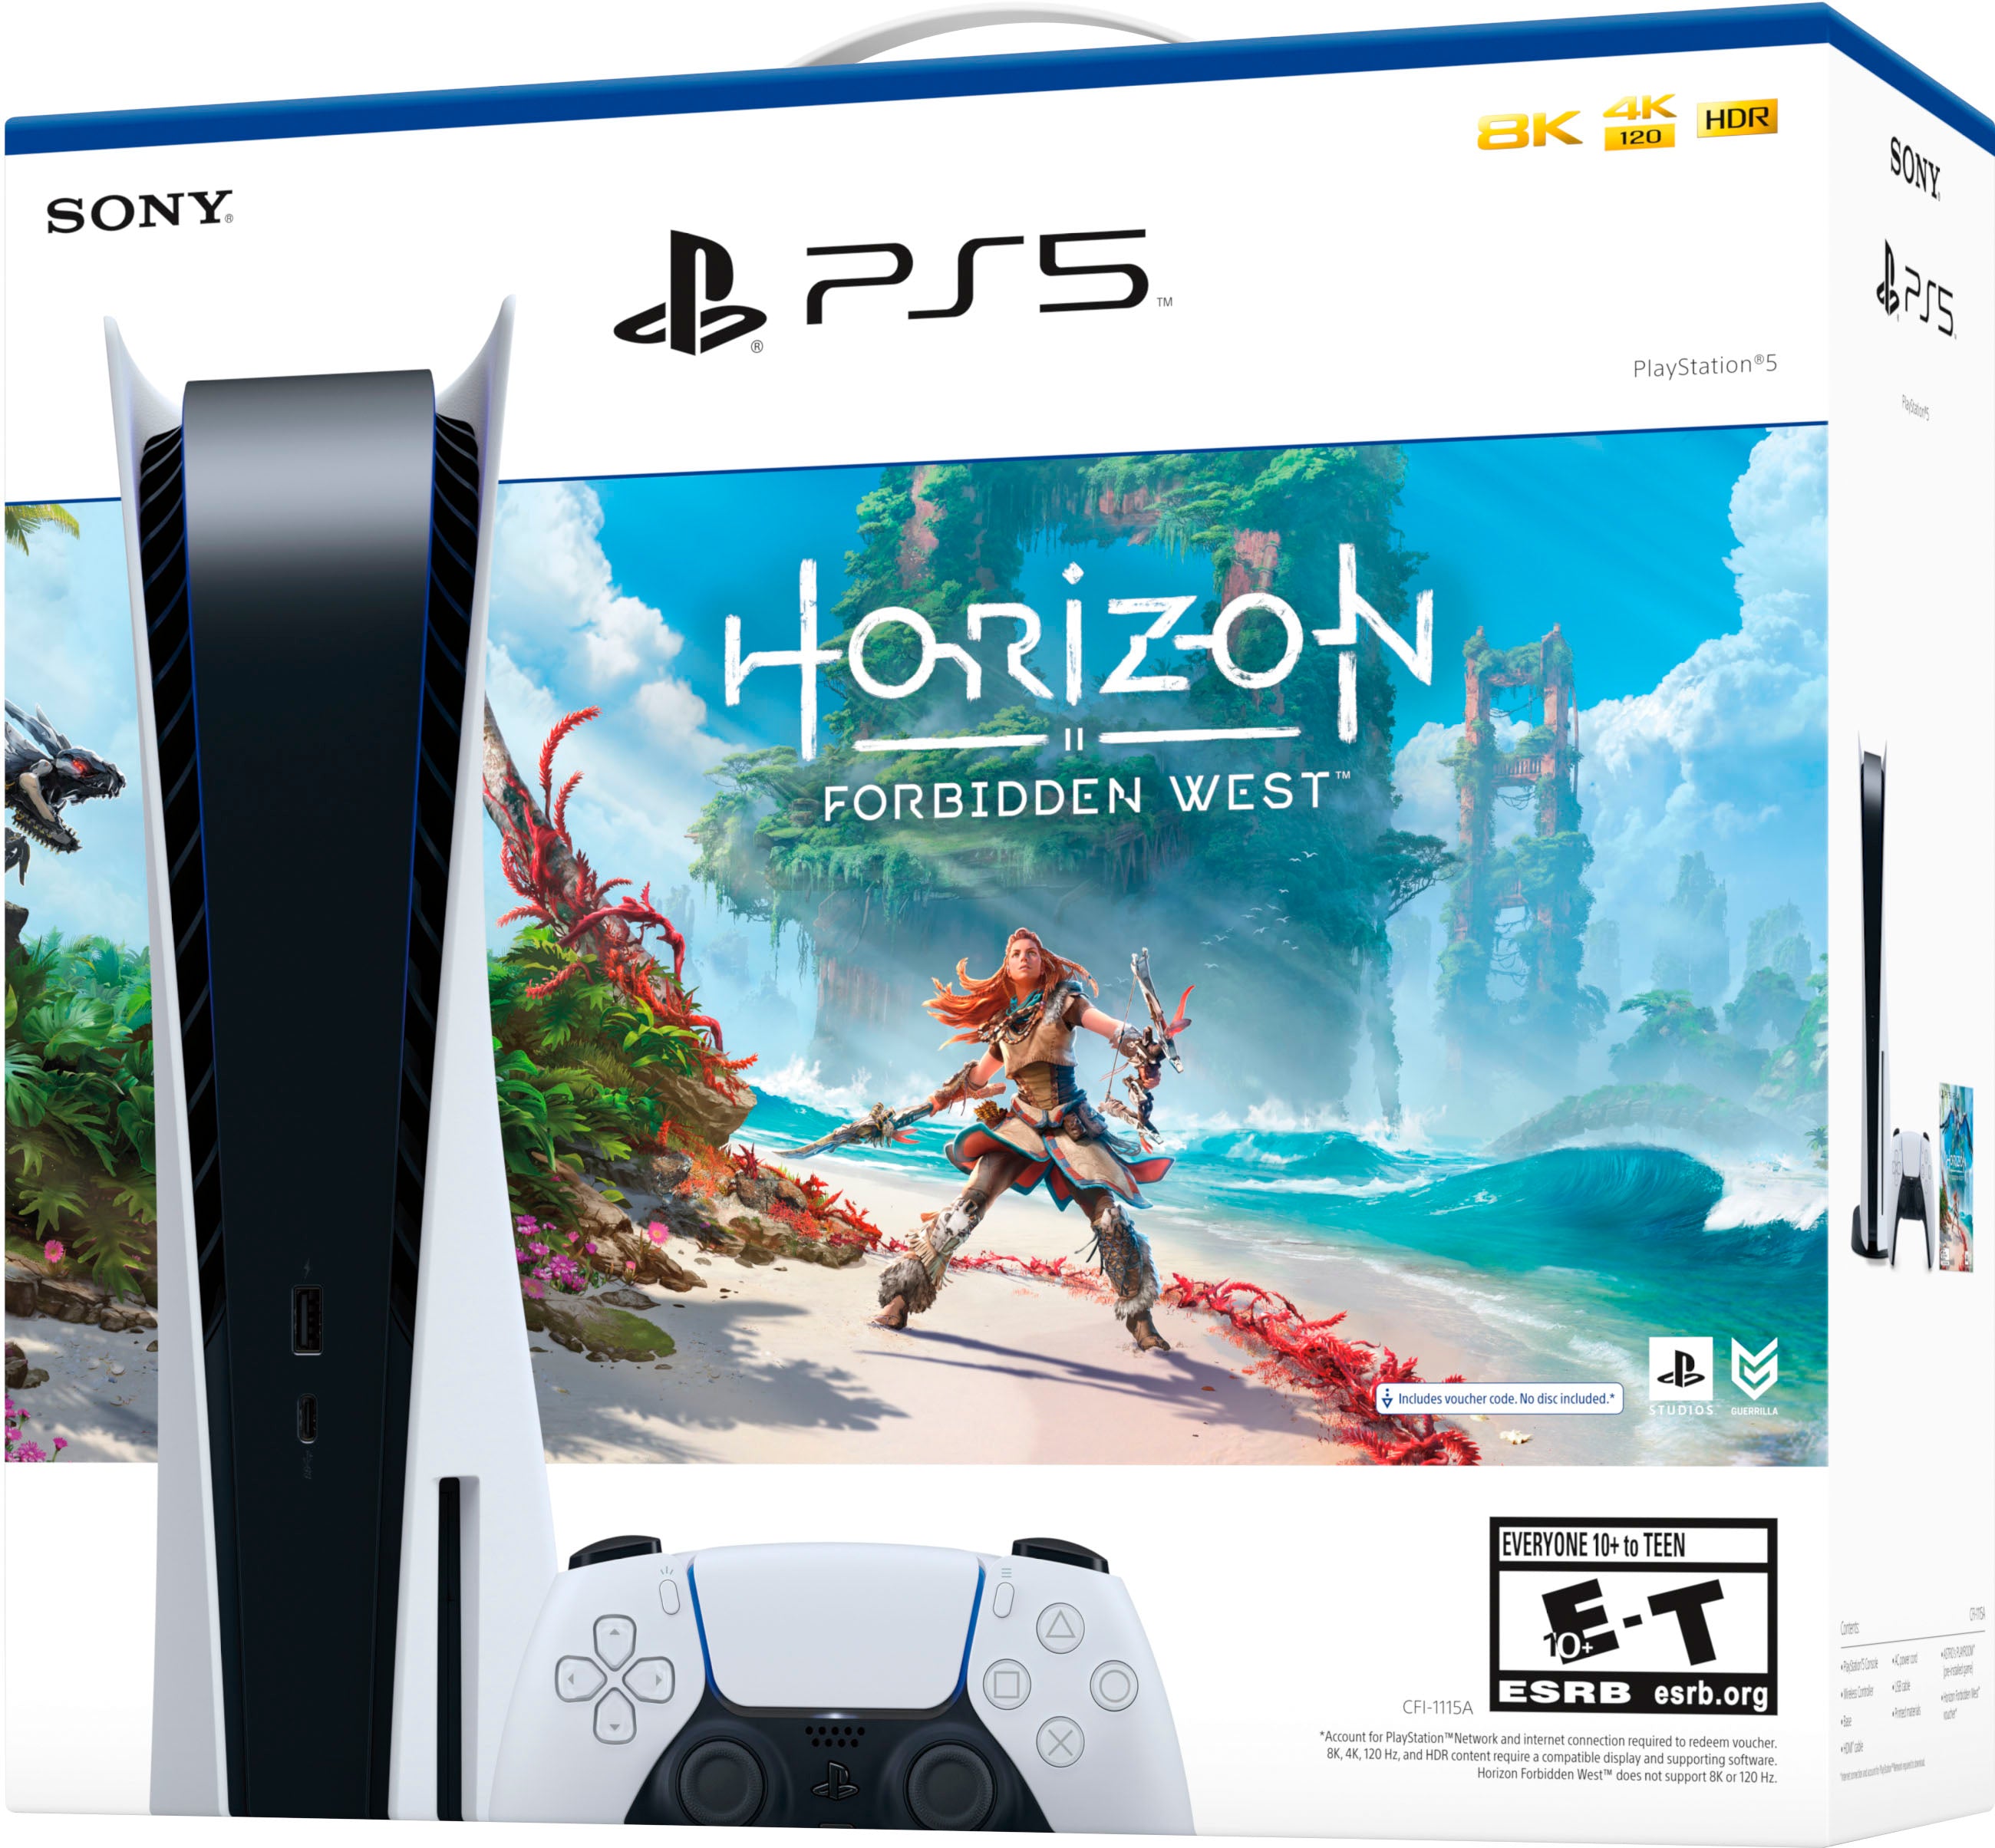 Playstation 5 1.8TB Upgraded Horizon Forbidden West Bundle with Horizon Zero Dawn and Mytrix Controller Charger